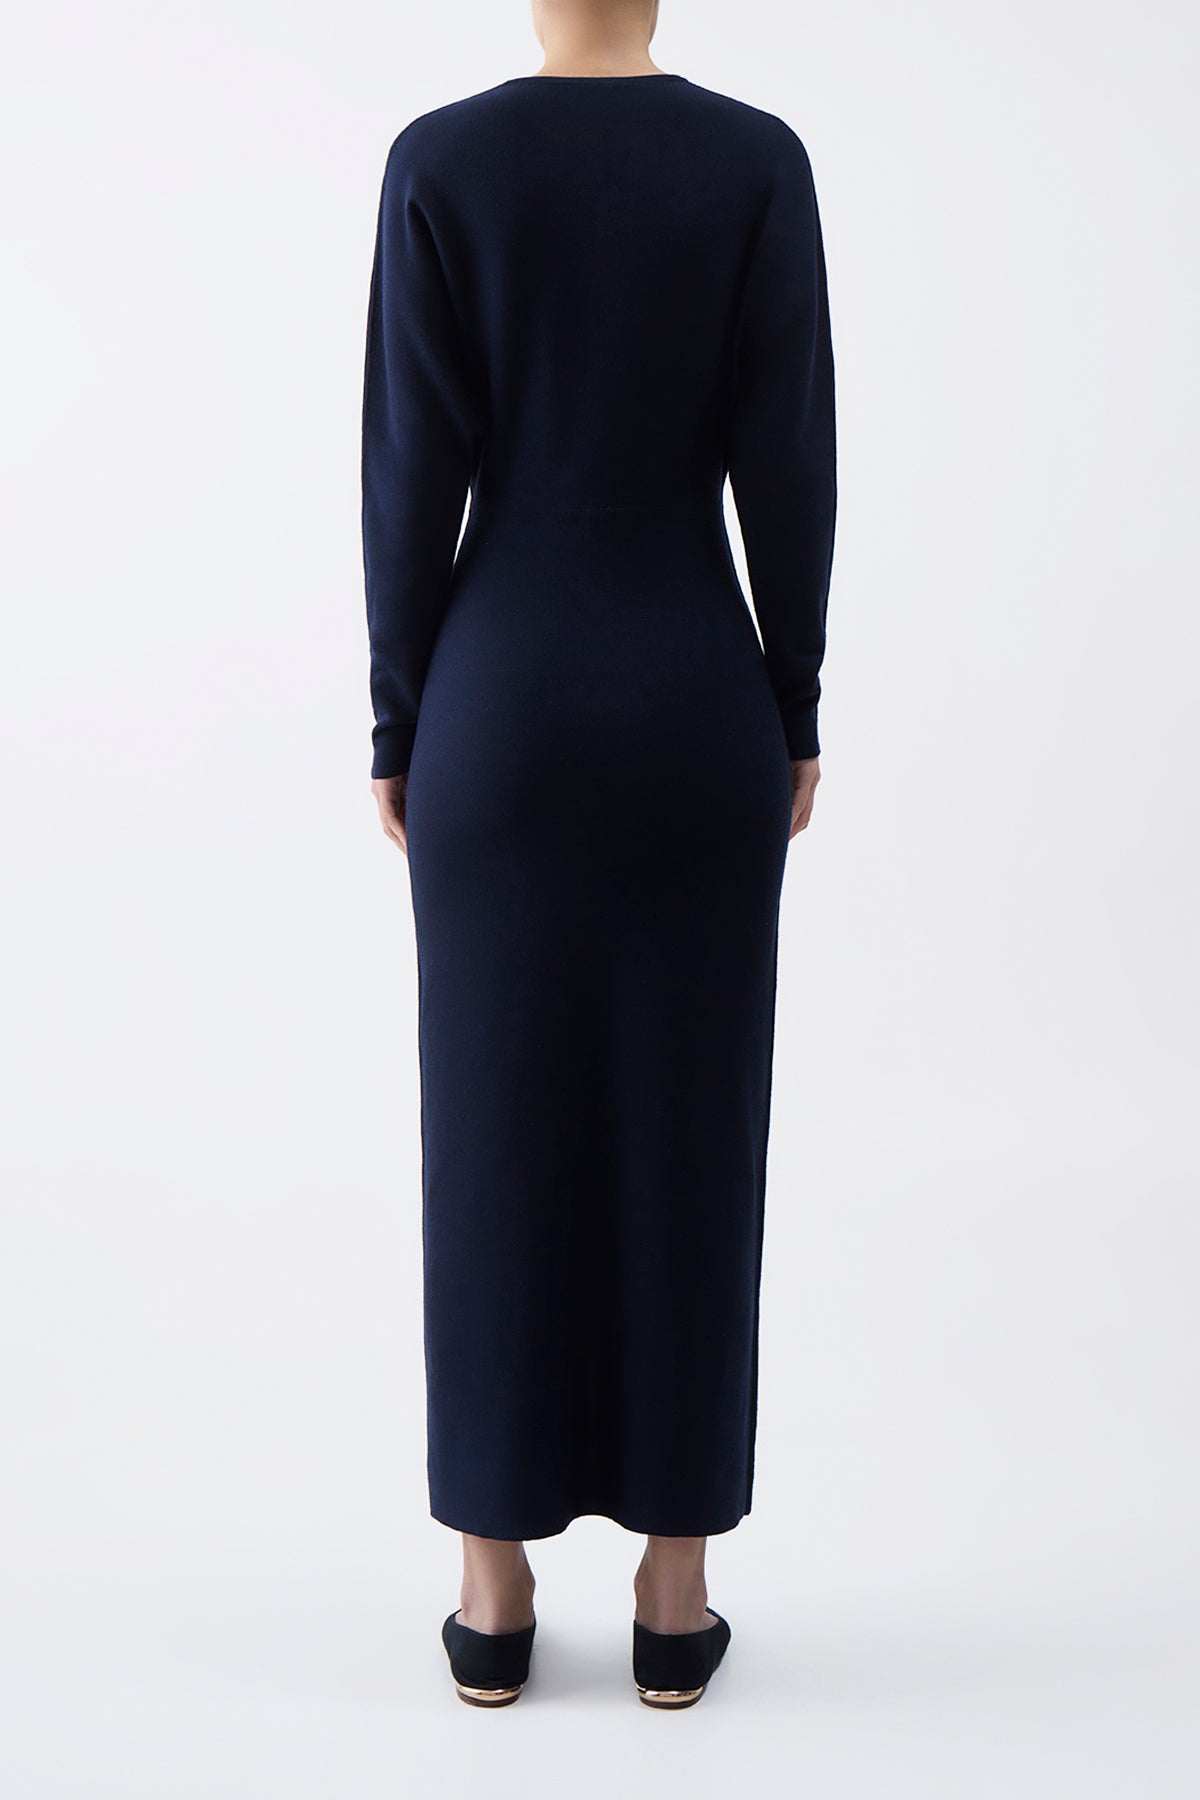 Semaine Knit Dress in Navy Silk Cashmere